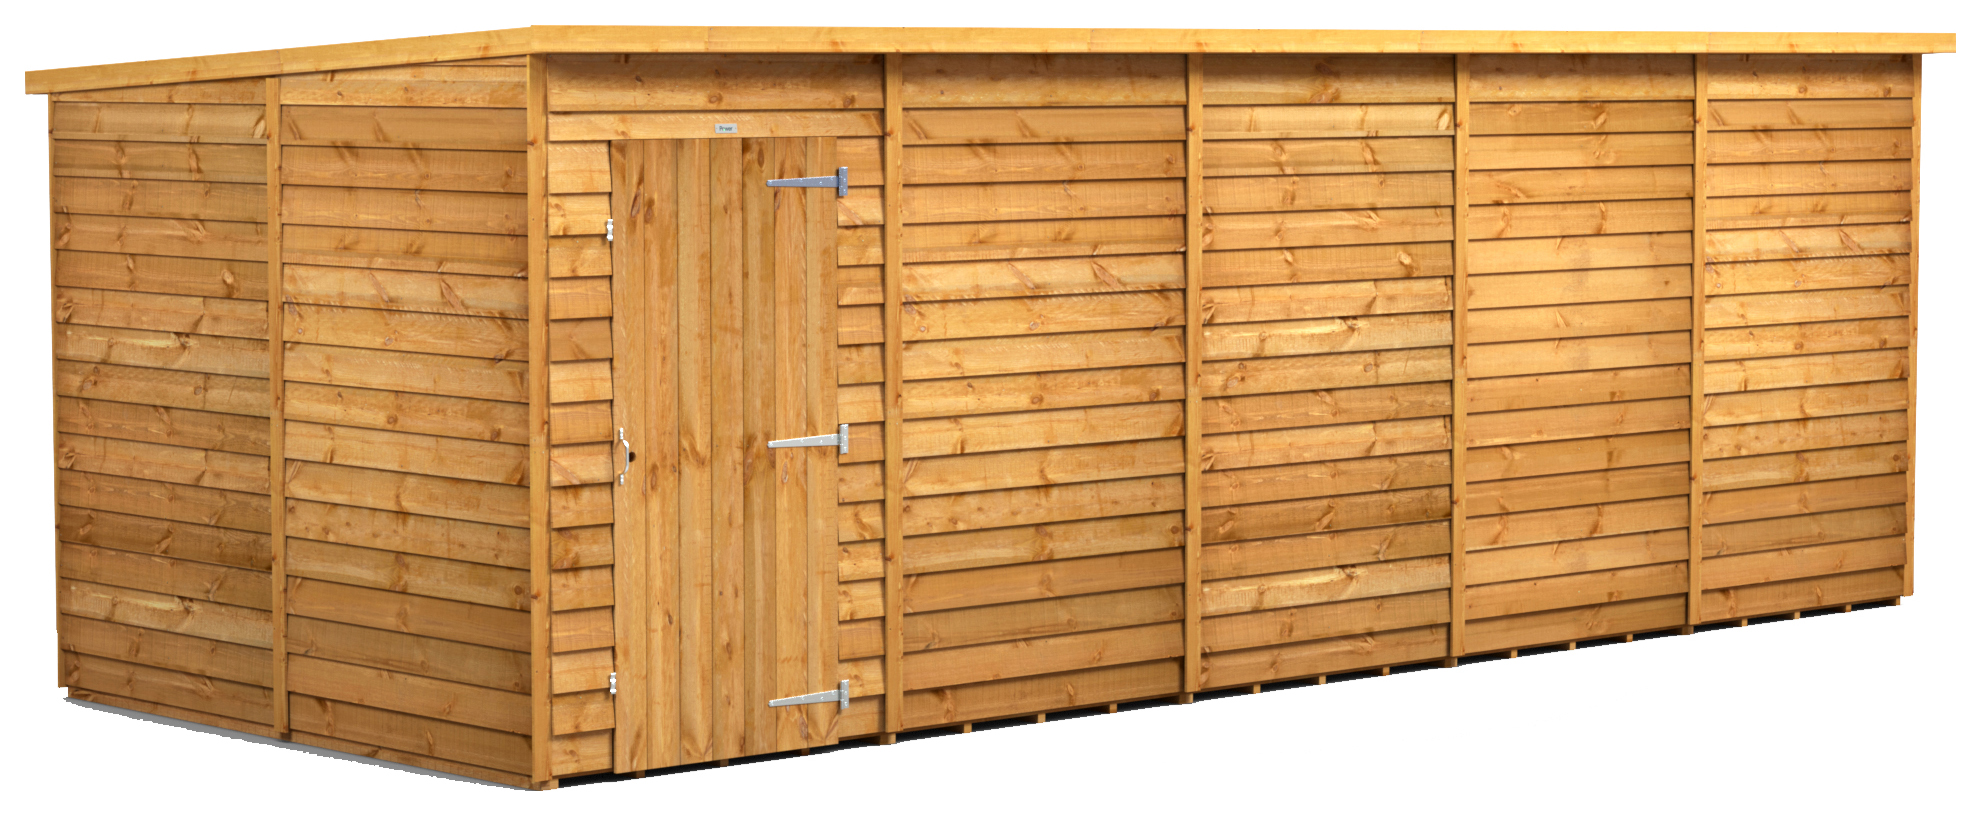 Power Sheds 20 x 8ft Pent Overlap Dip Treated Windowless Shed